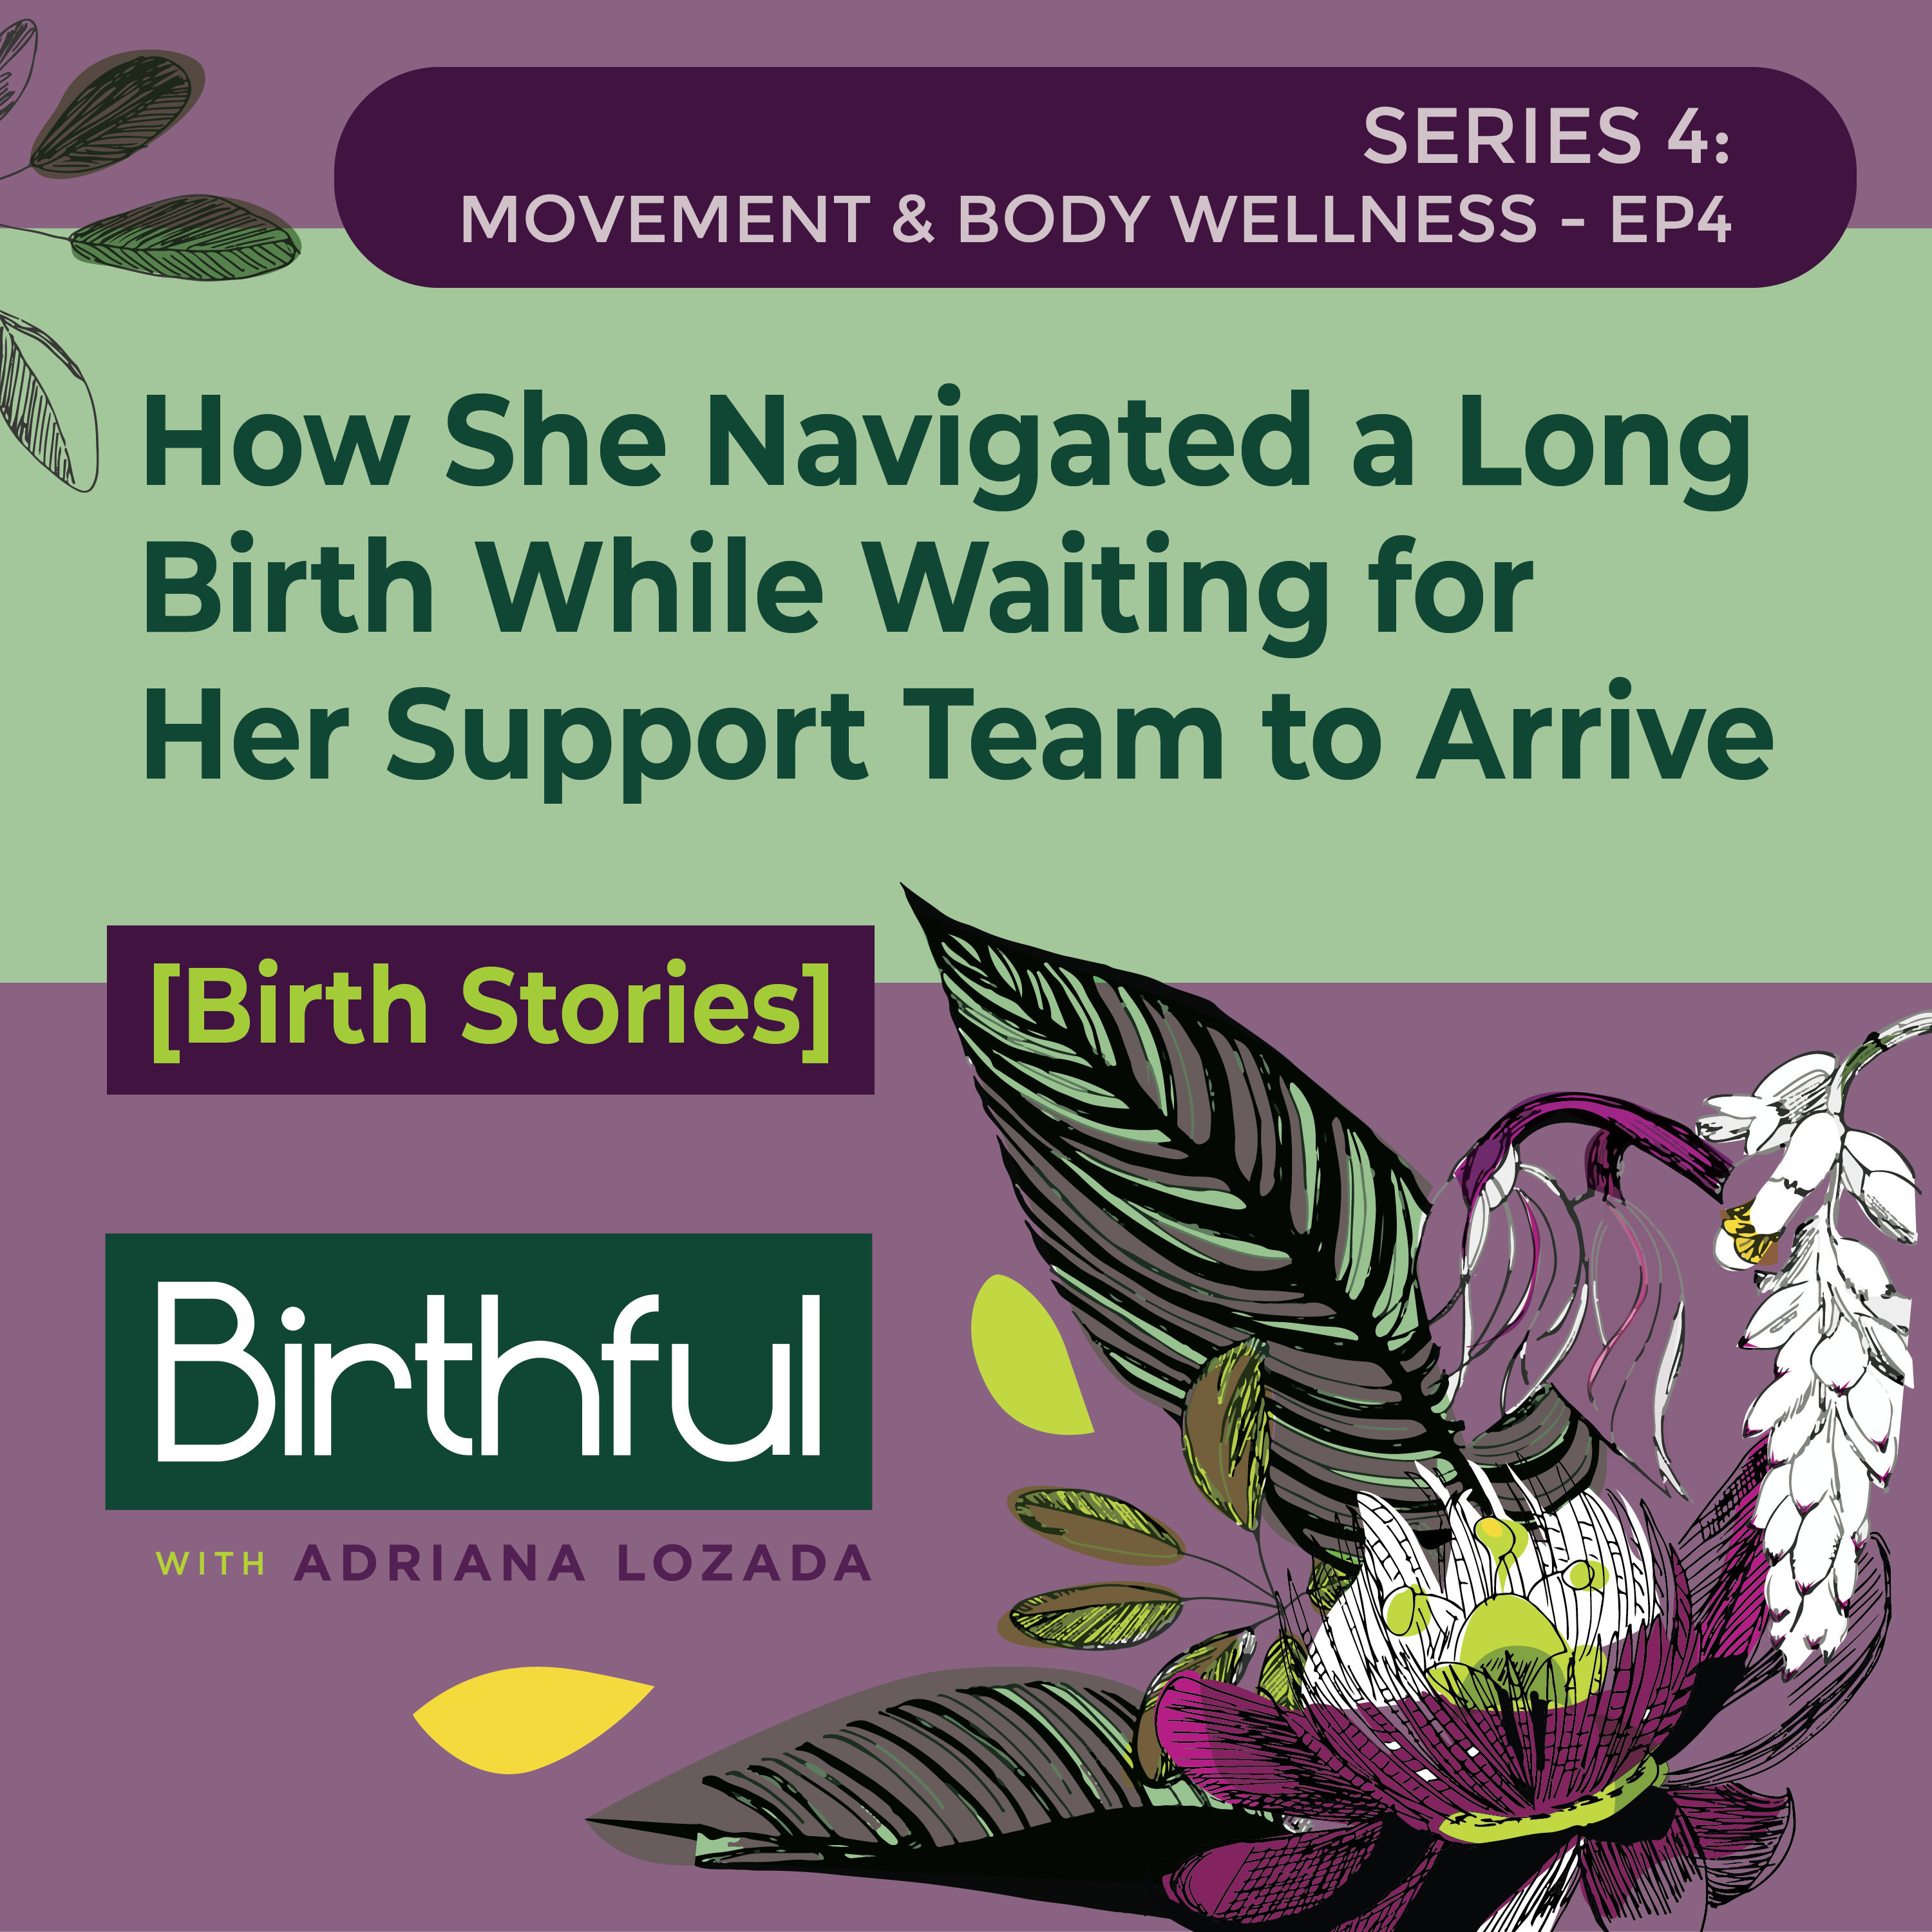 [Birth Stories] How She Navigated a Long Birth While Waiting for Her Support Team to Arrive